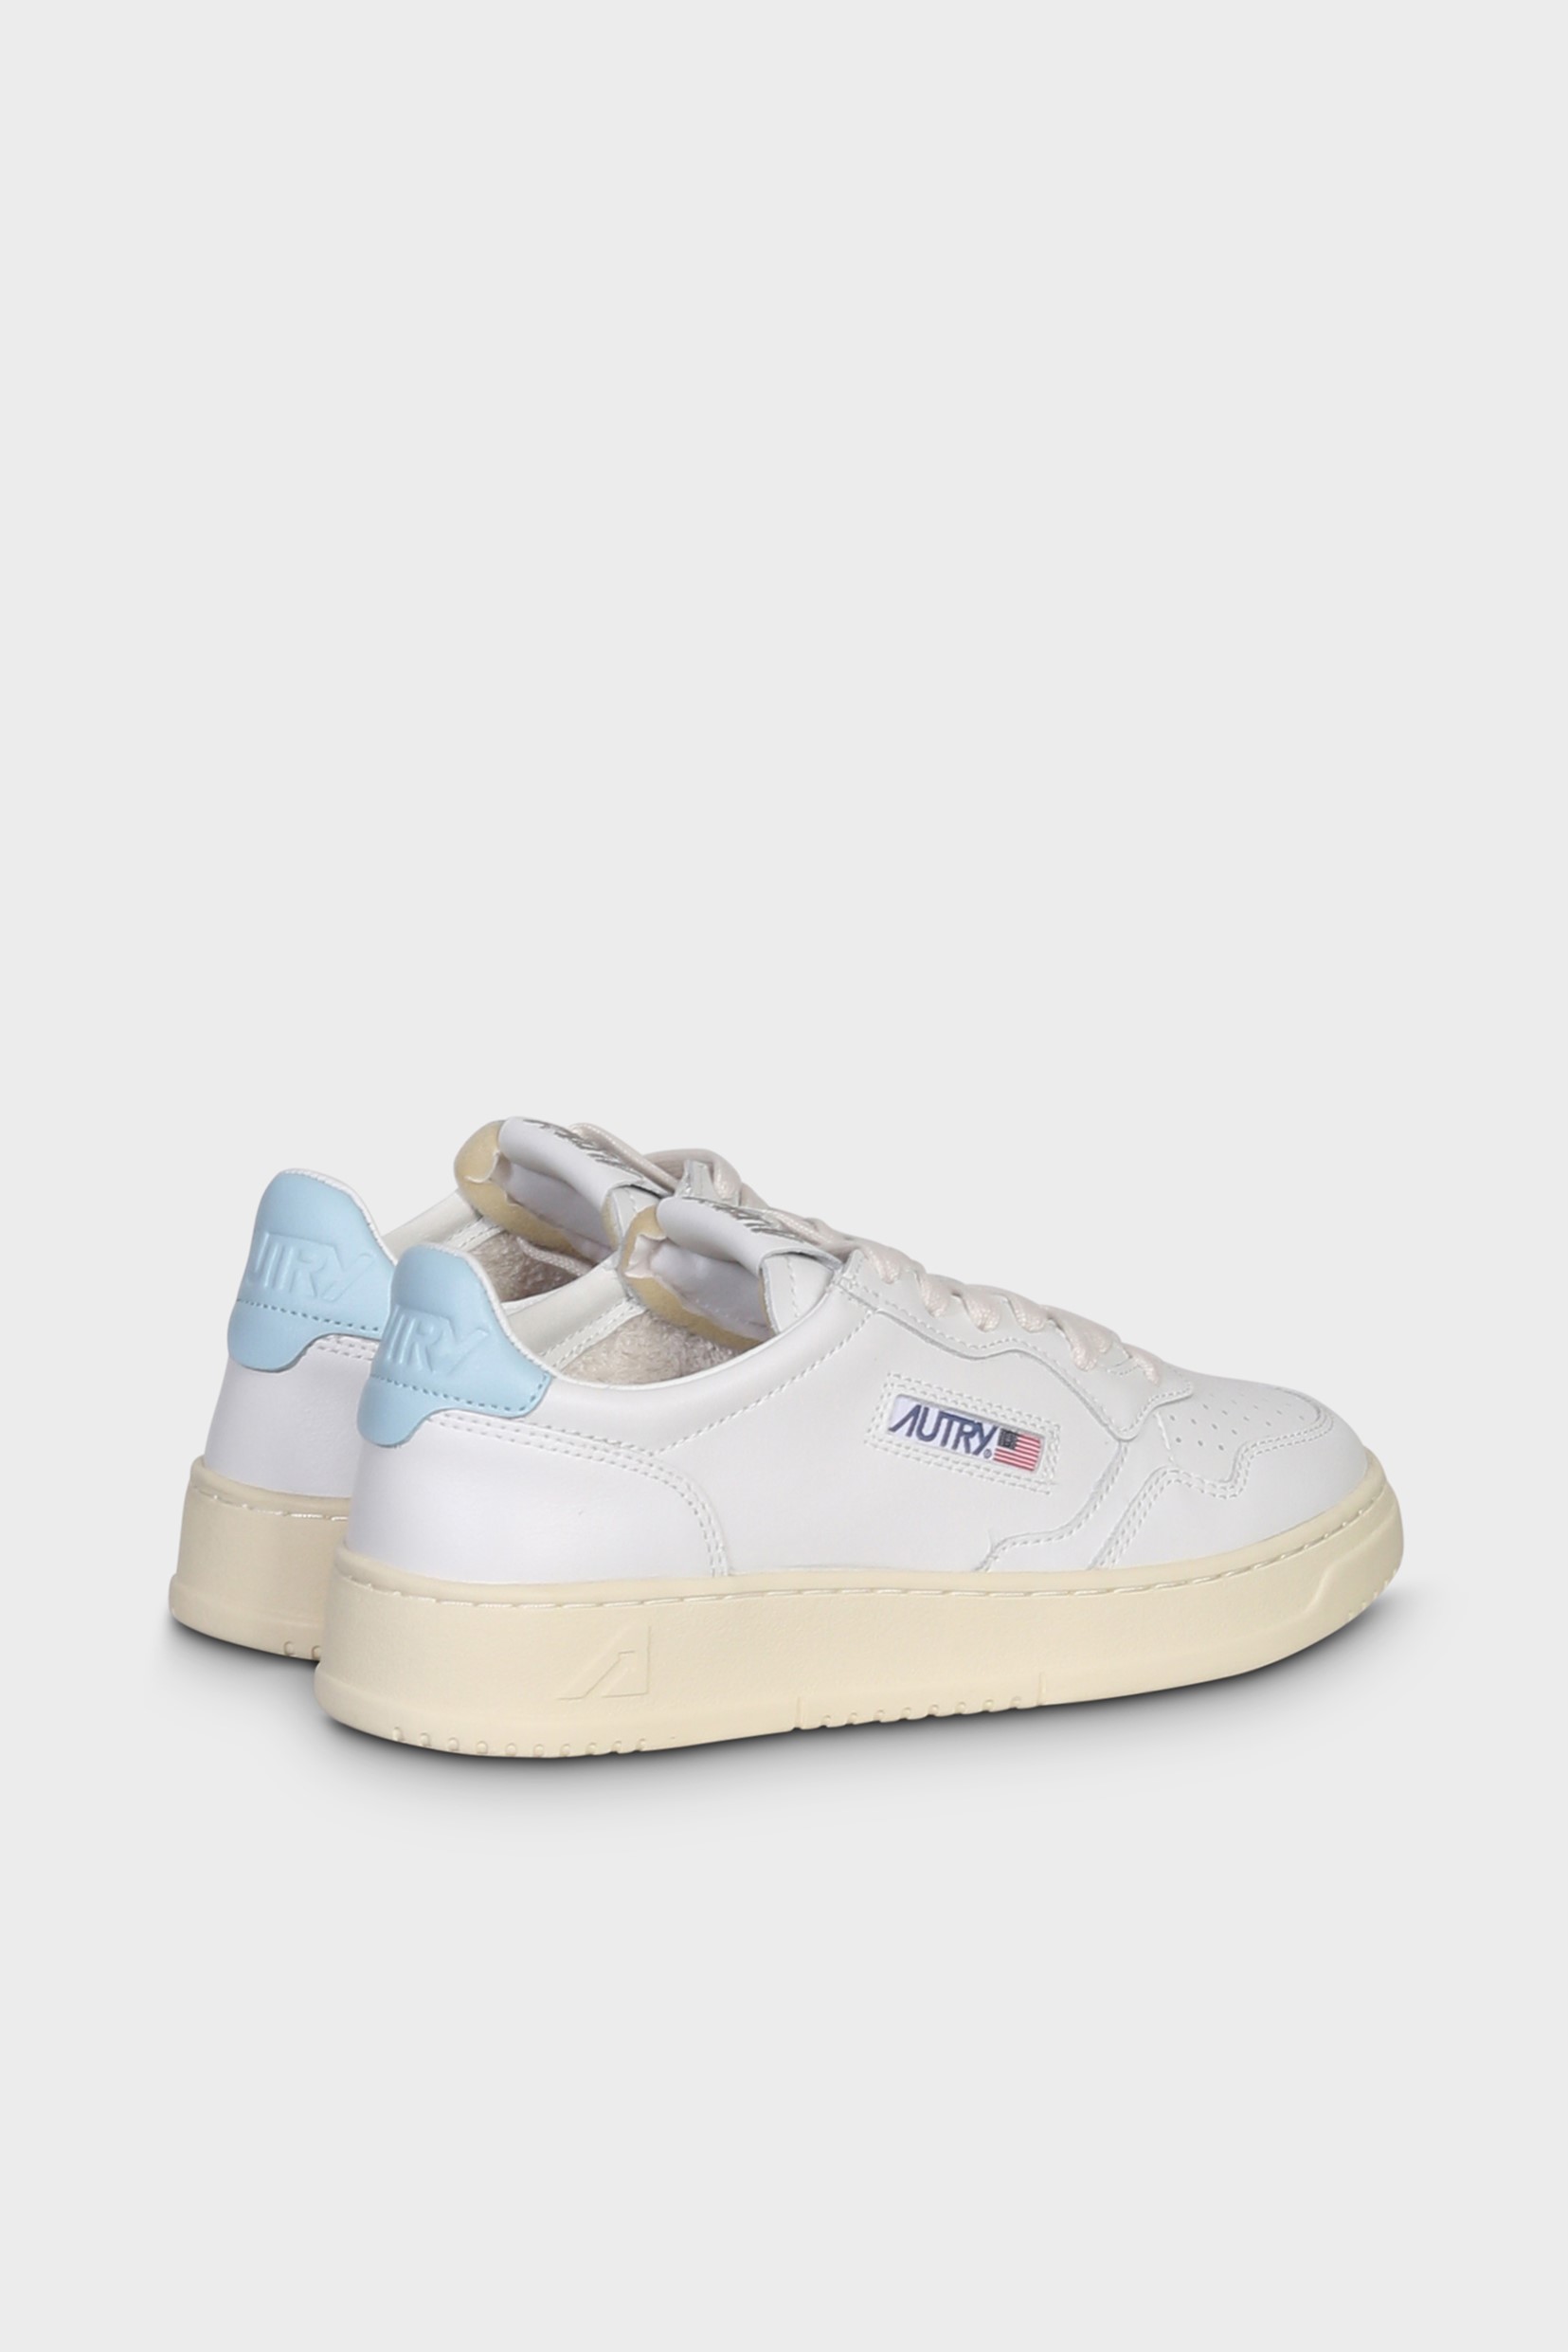 AUTRY ACTION SHOES Sneaker Low in White/Stream Blue 40